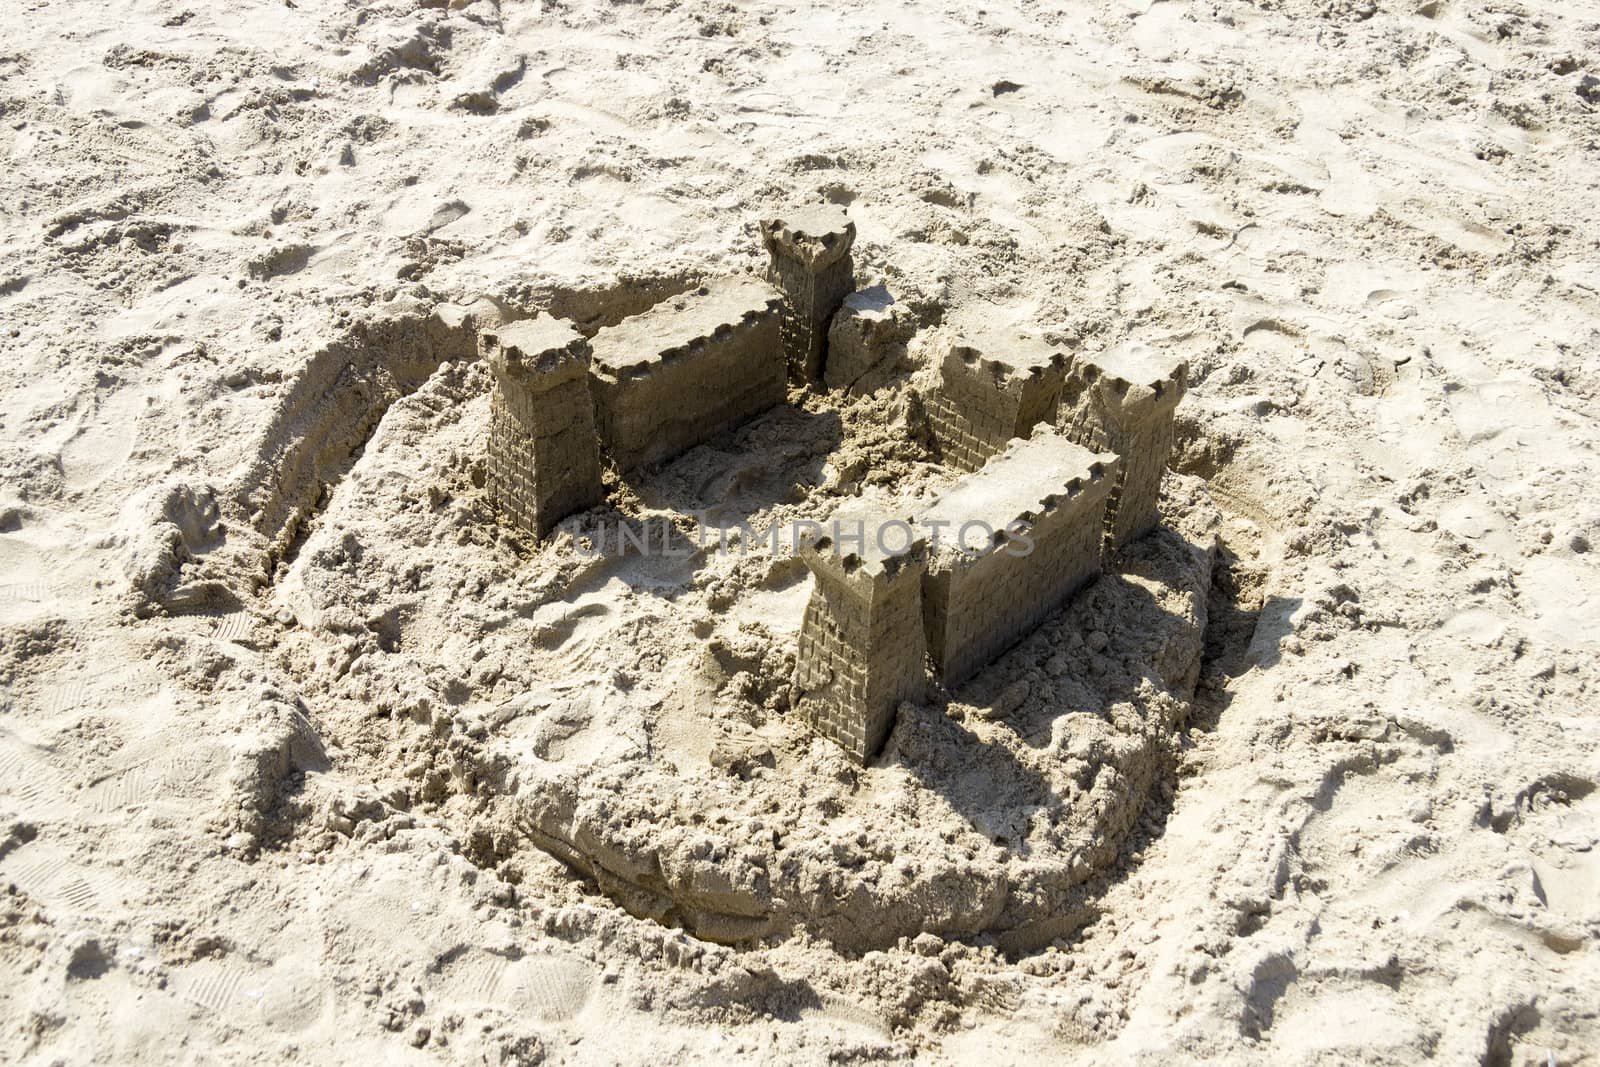 Sand Castle on the Beach, North Sea, Netherlands by Tetyana